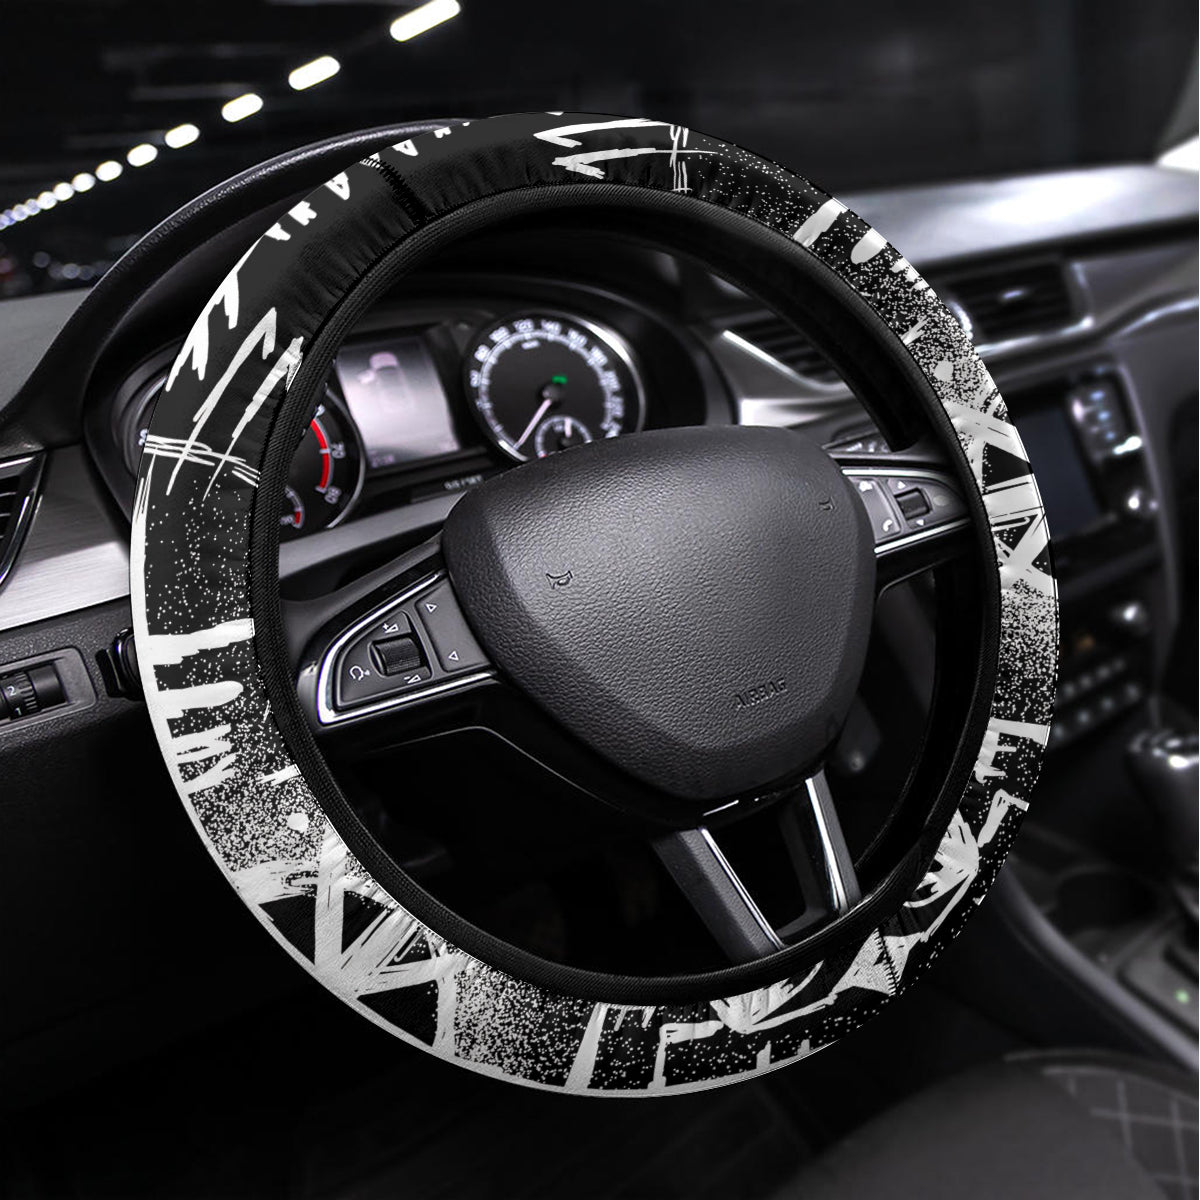 Vikings Raven and Wolf Steering Wheel Cover with Aegishjalmur Unique